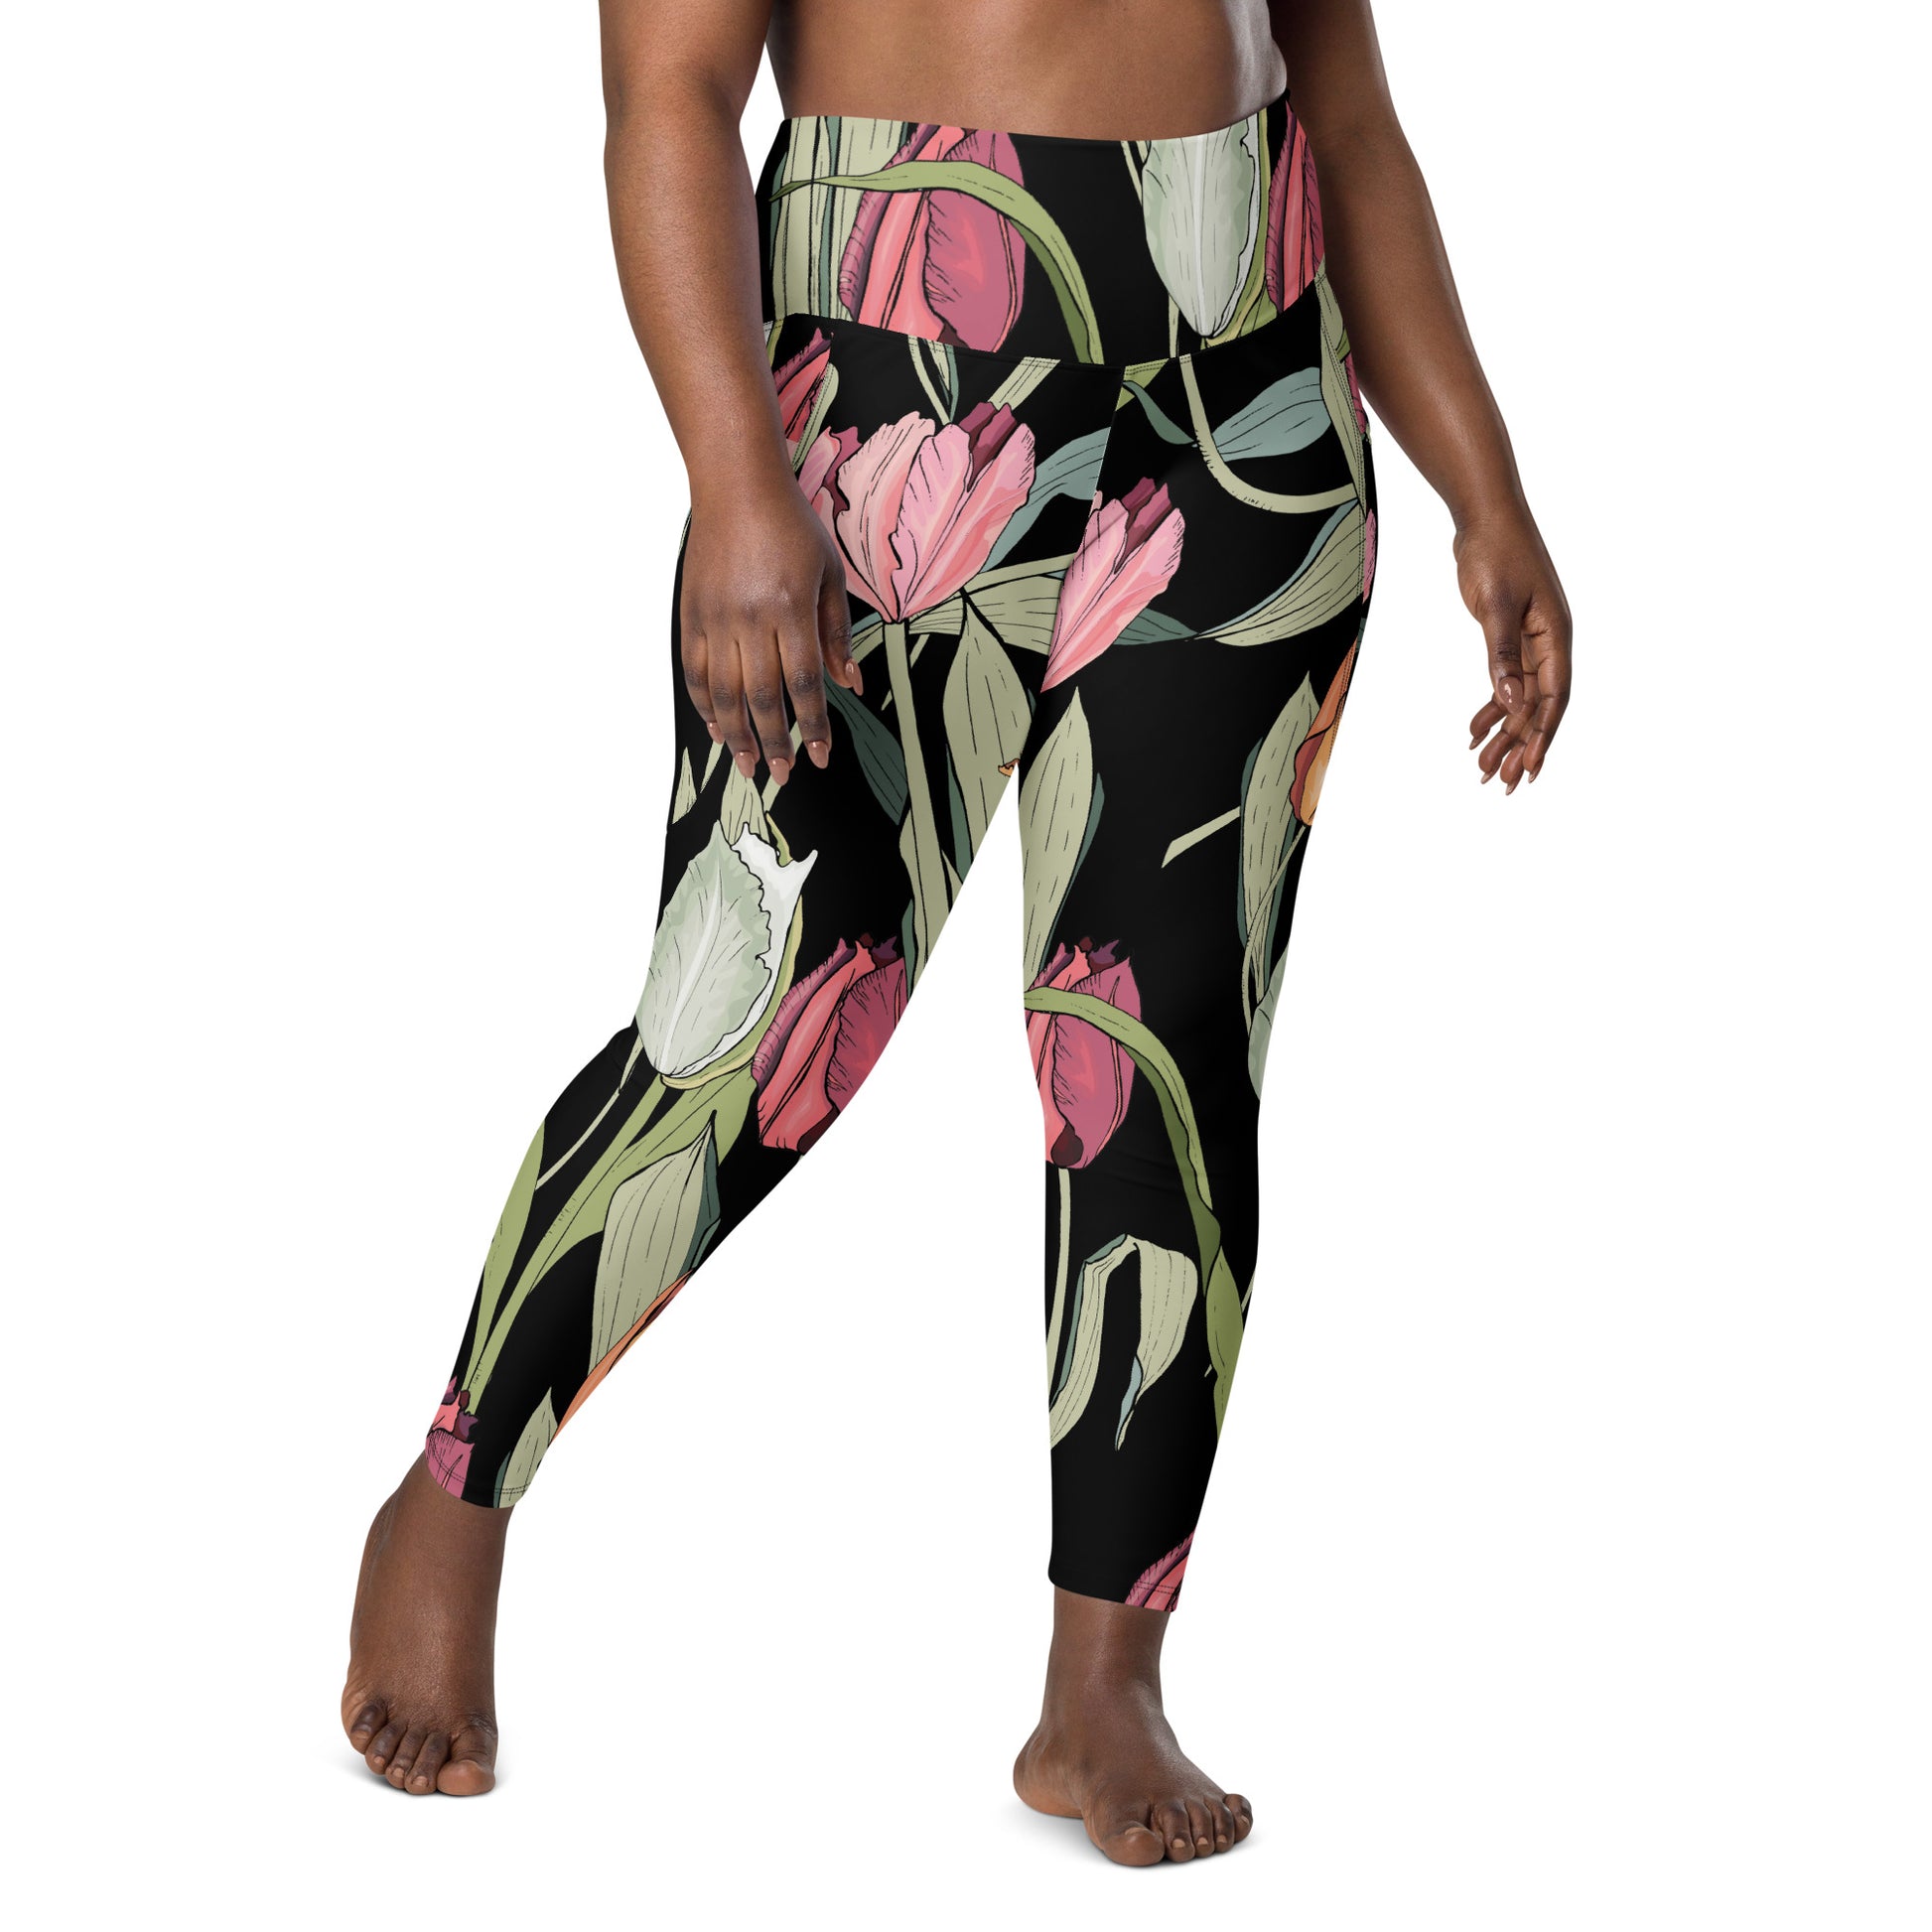 Tulips - Leggings with pockets, 2XS - 6XL Leggings With Pockets 2XS - 6XL (US)